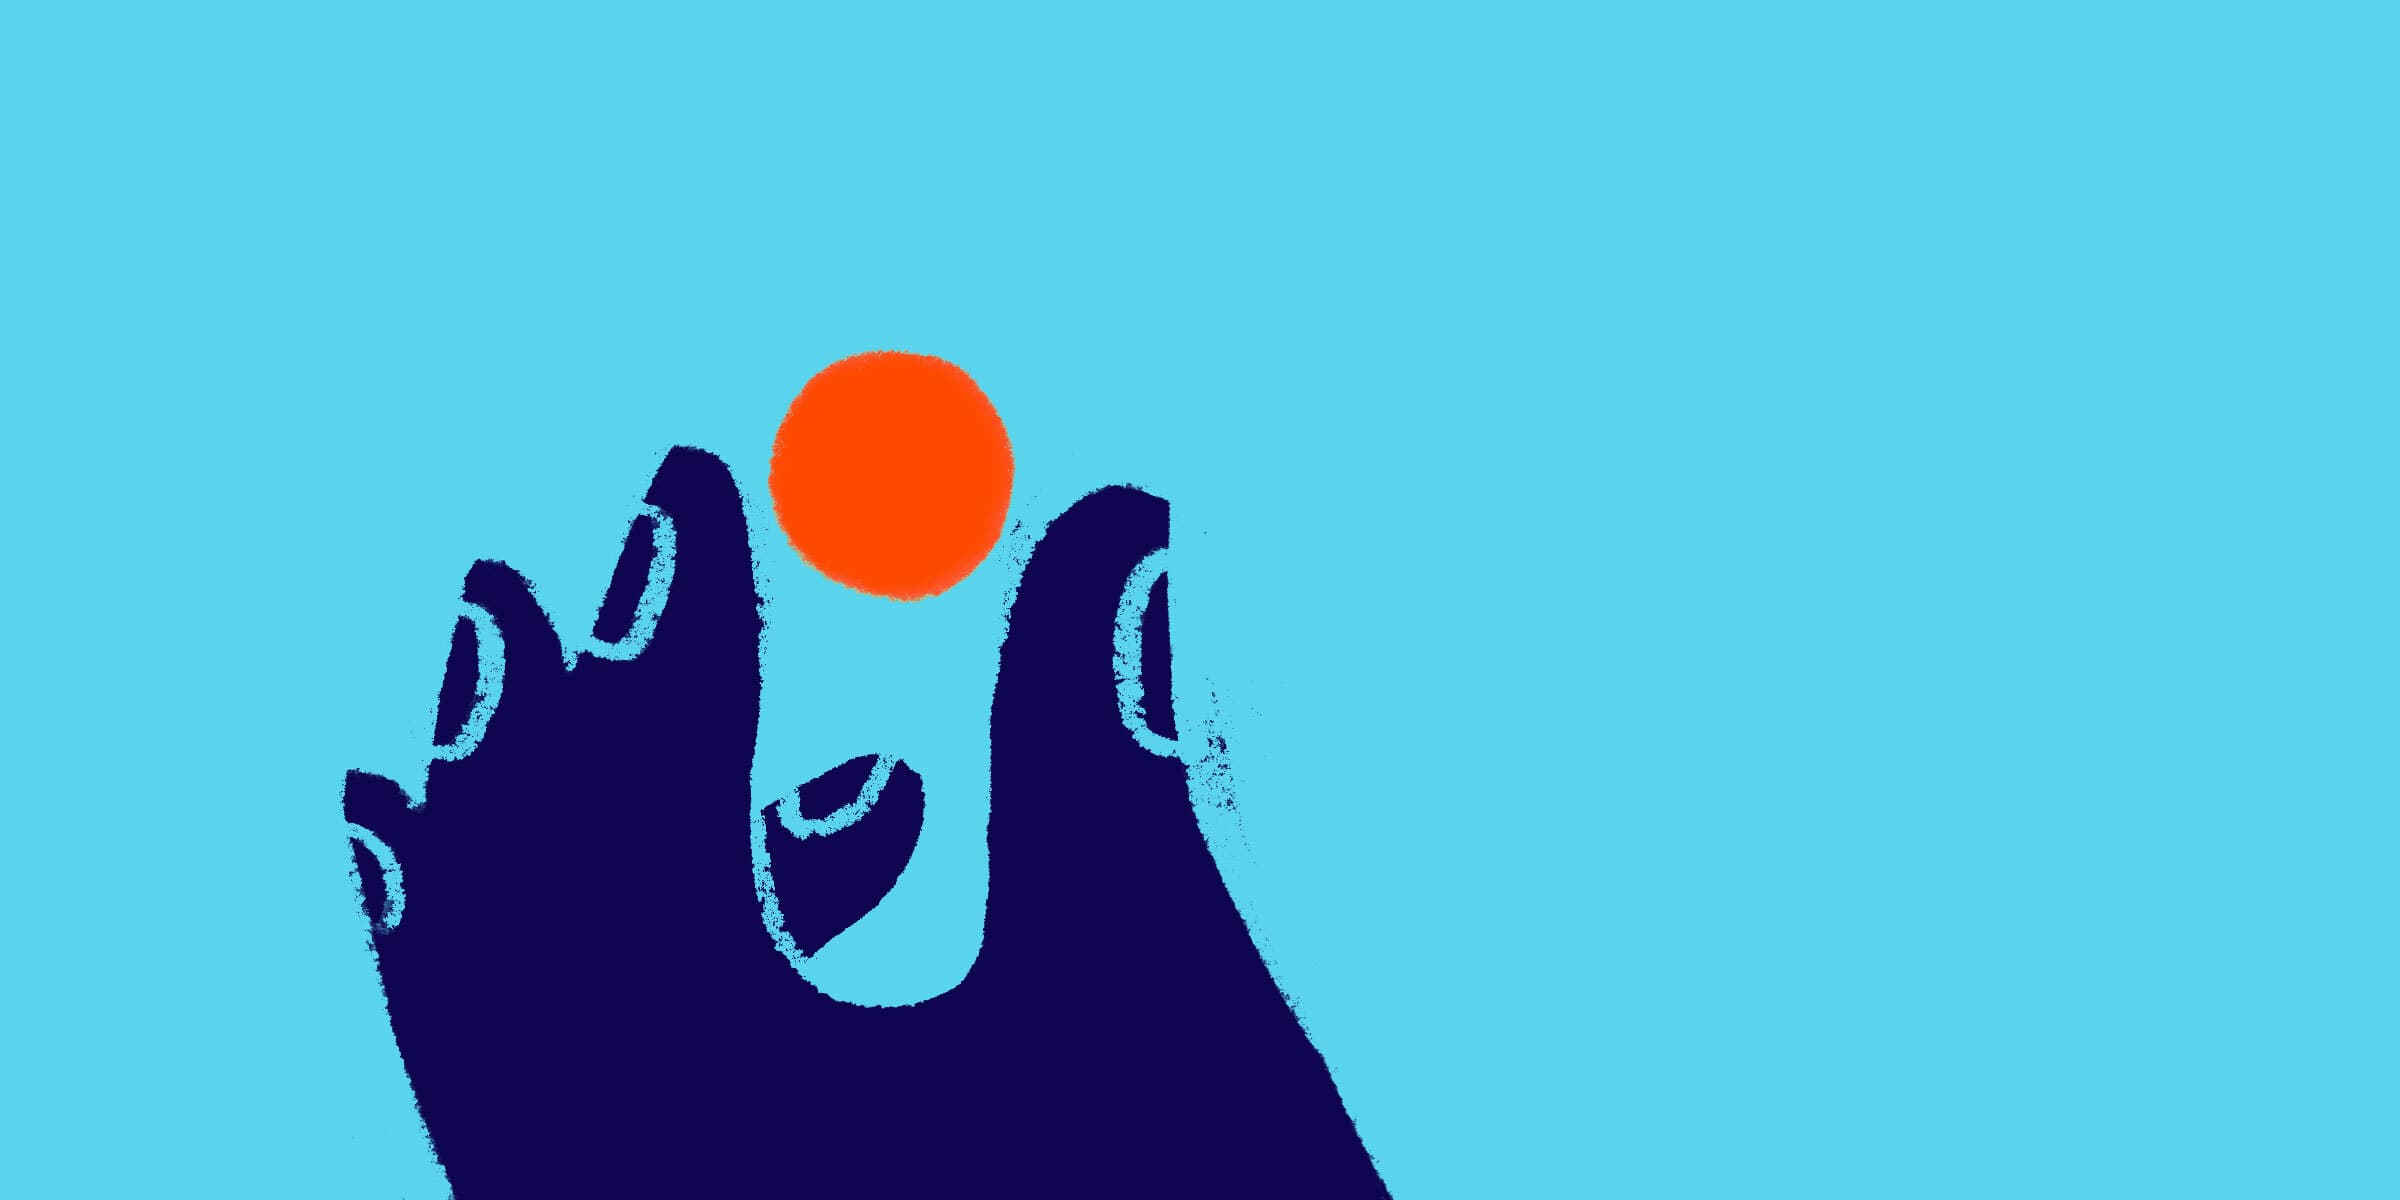 An abstract illustration of a hand with dark blue fingers holding an orange sphere against a light blue background. The simplicity and bold colors create a striking visual contrast.